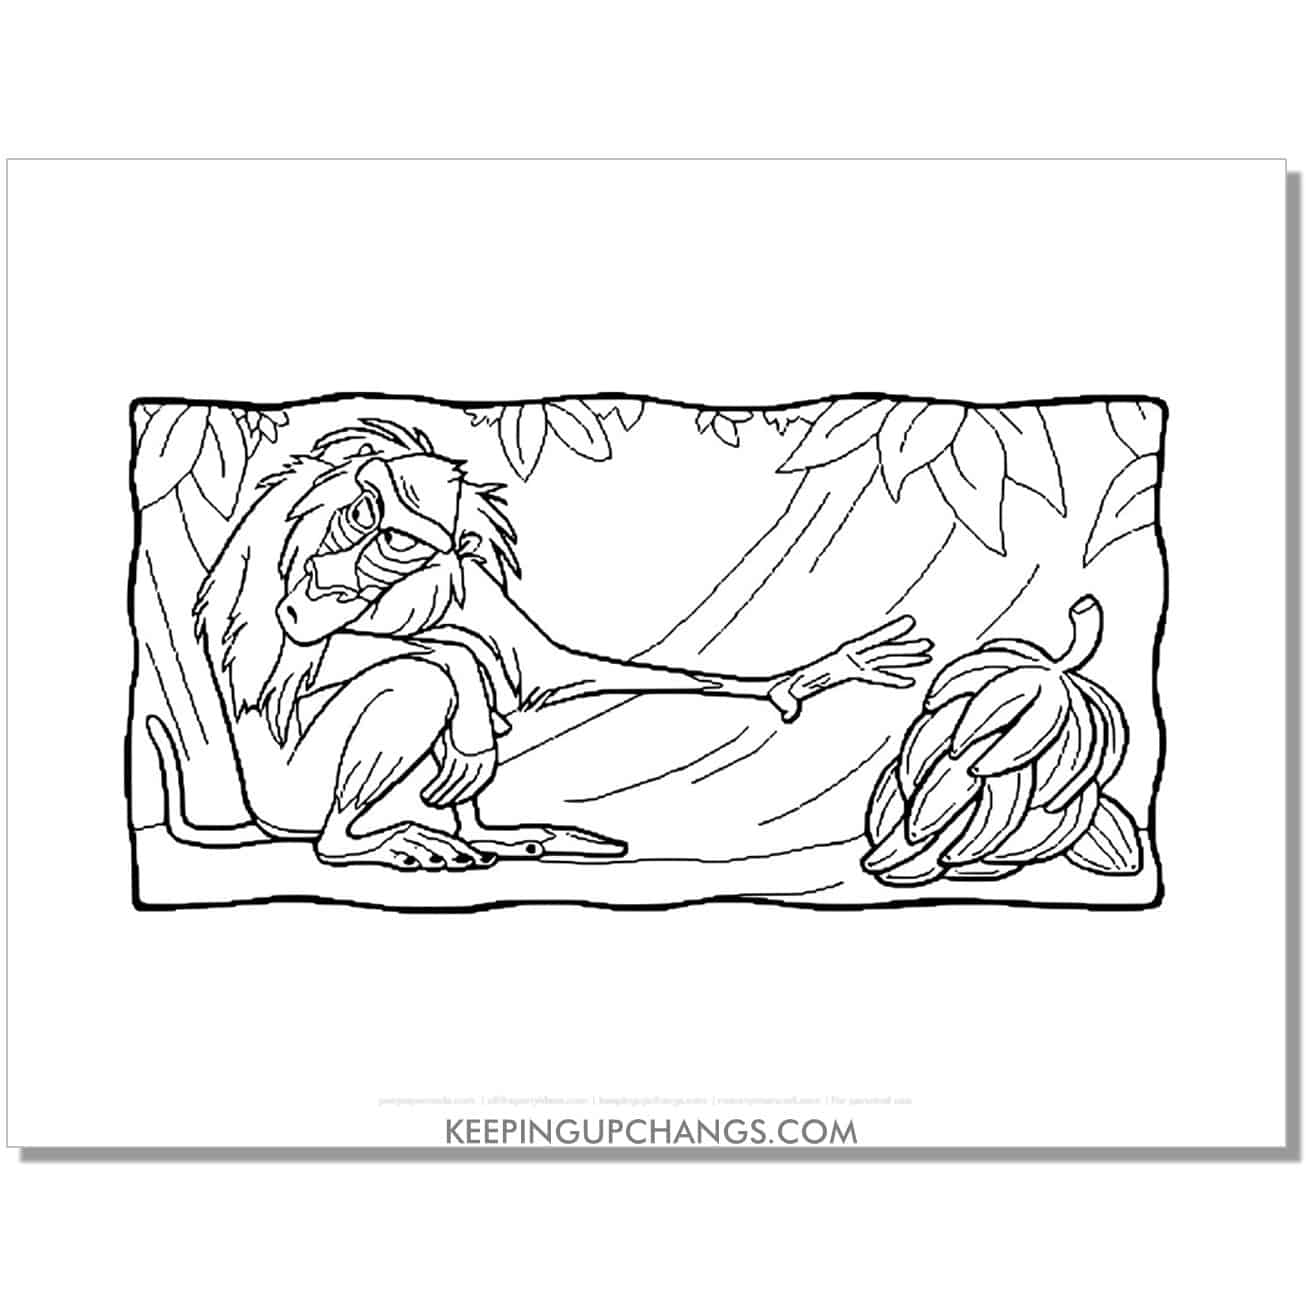 rafiki with bunch of bananas lion king coloring page, sheet.